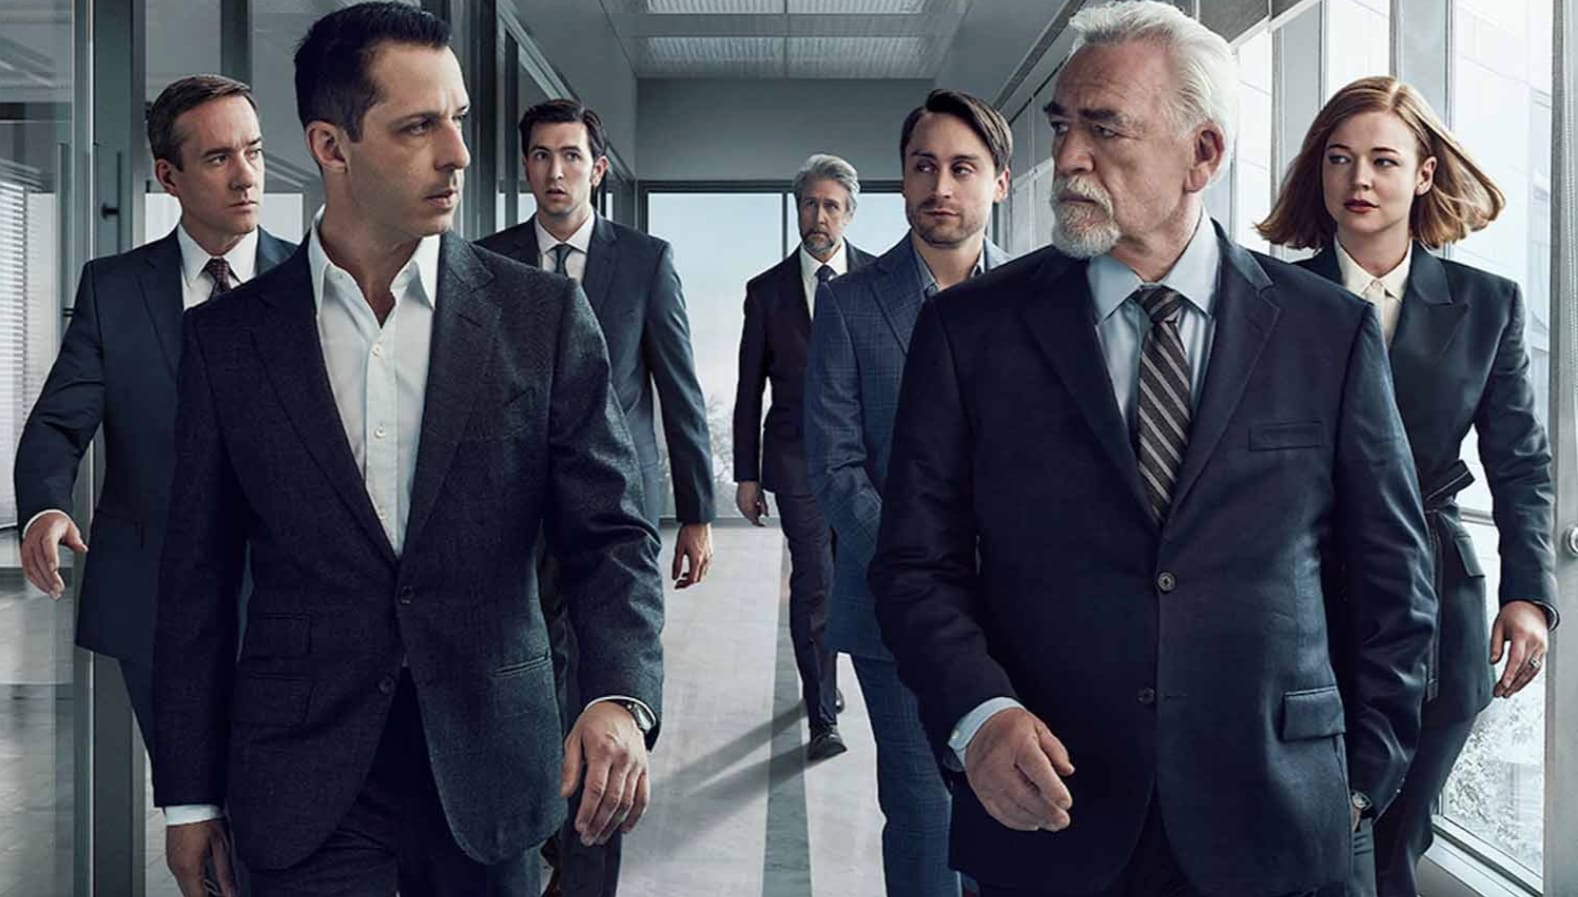 HBO’s Succession to end with upcoming season 4. Here are past horological highlights